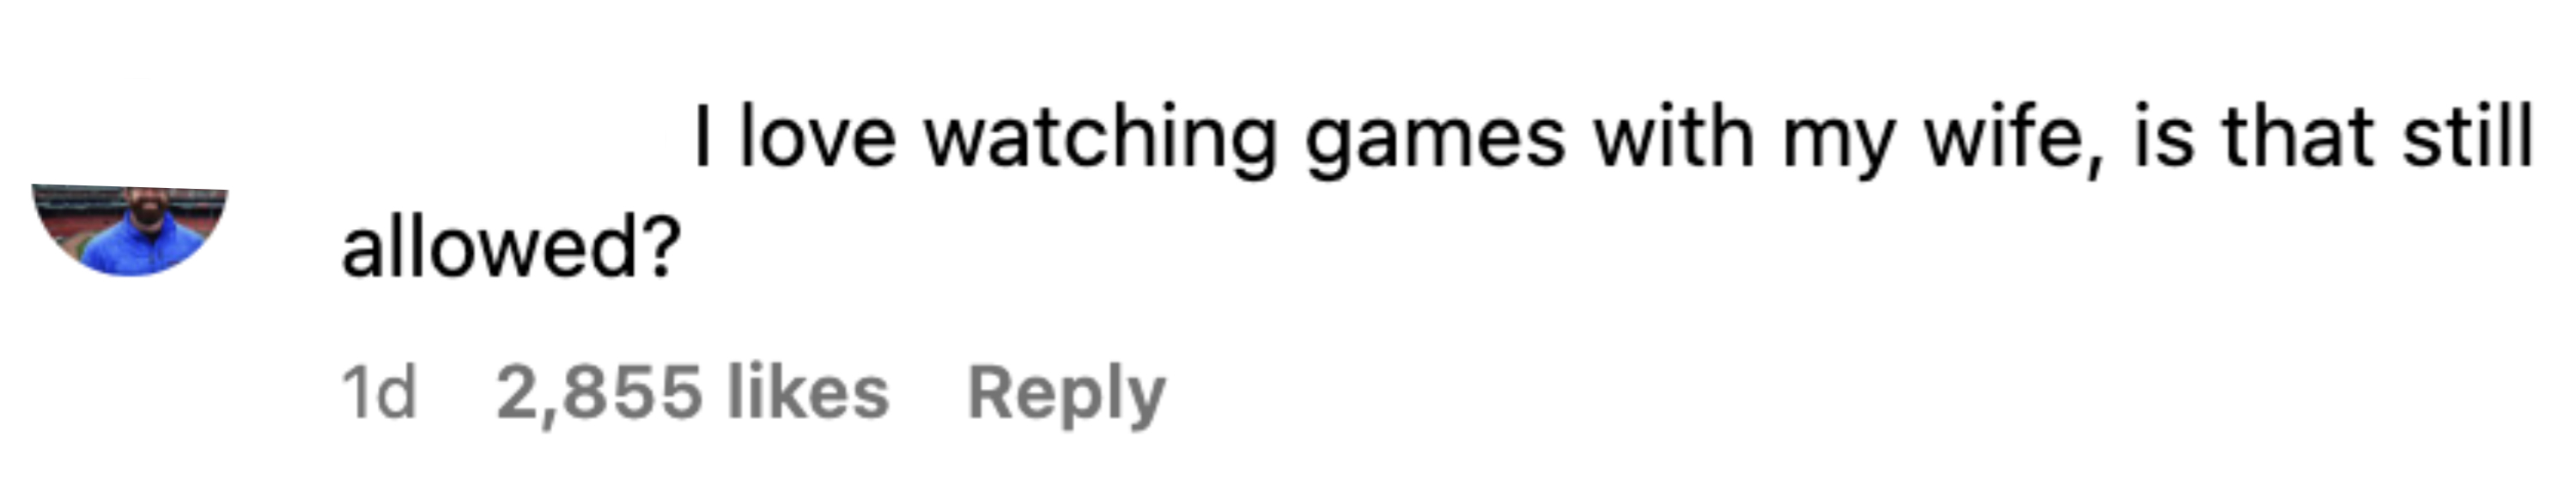 &quot;I love watching games with my wife, is that still allowed?&quot; The comment has 2,855 likes